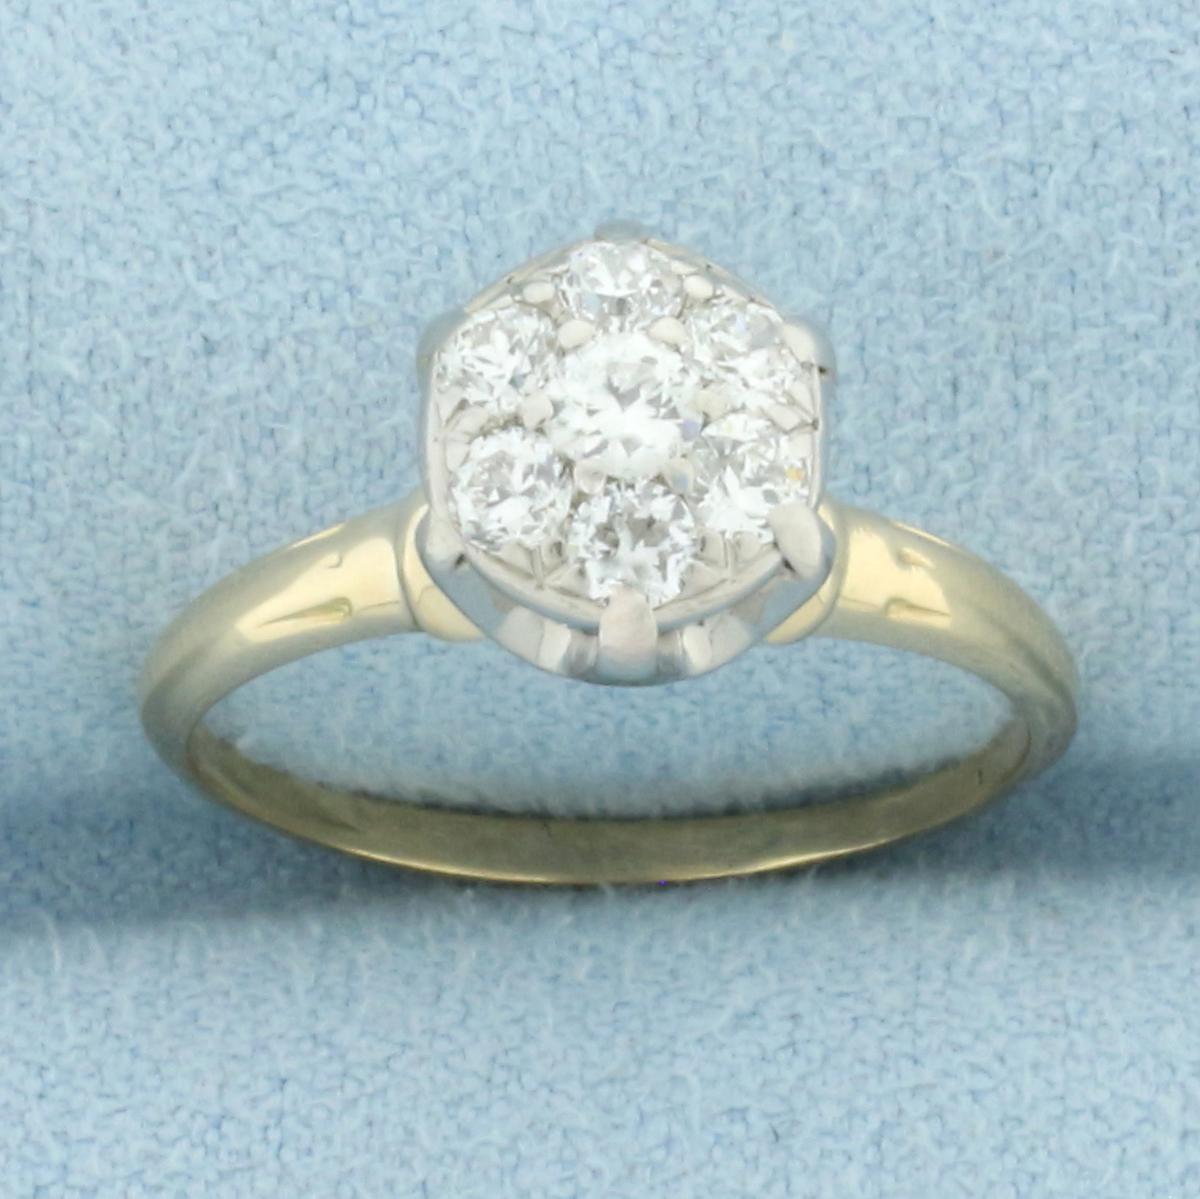 Antique Pave Set Diamond Engagement Ring In 14k Yellow Gold